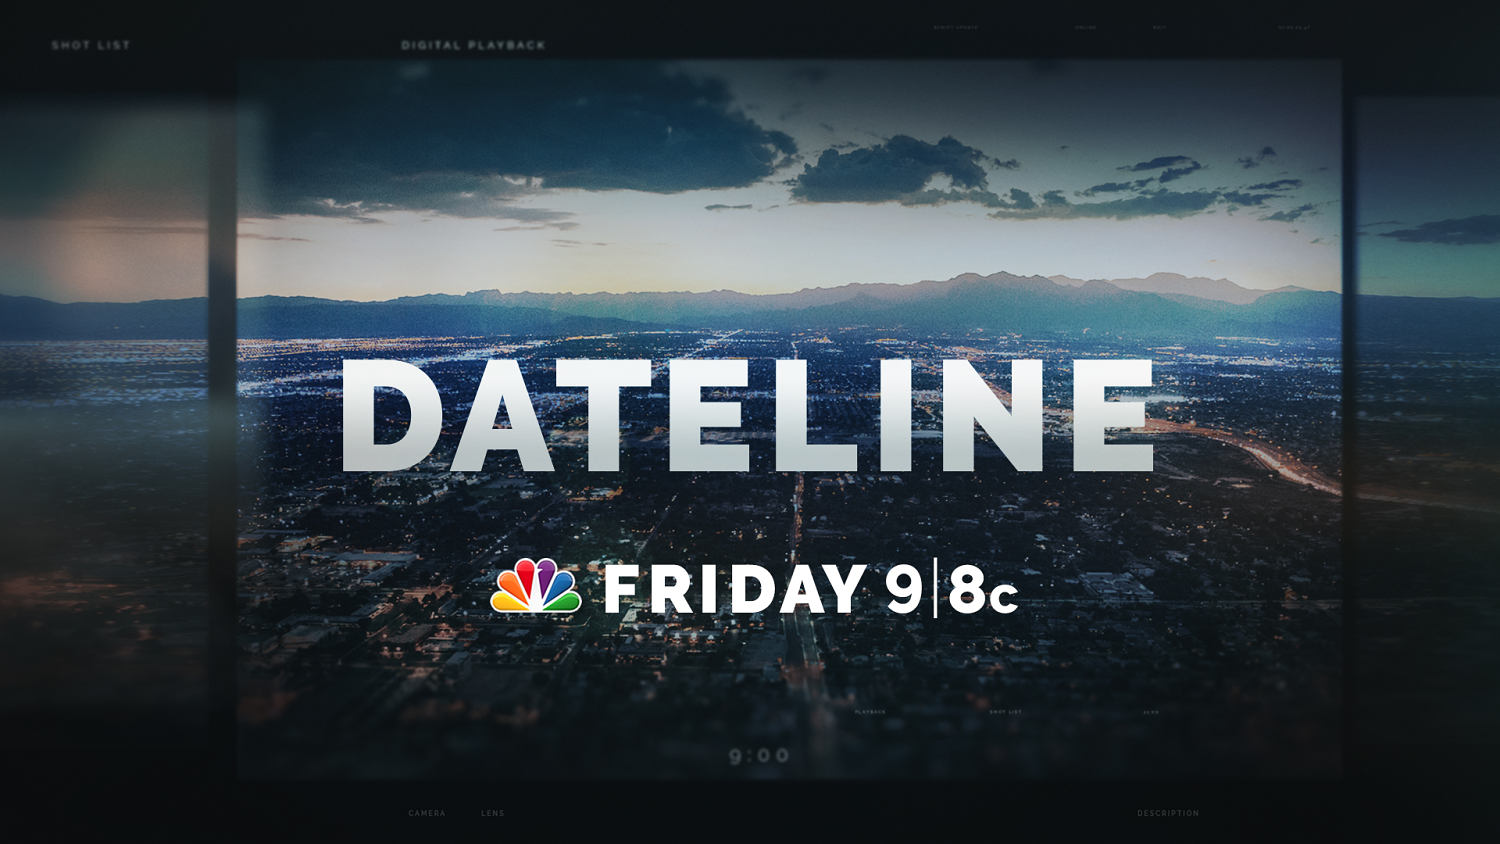 DATELINE FRIDAY PREVIEW: The Road Trip